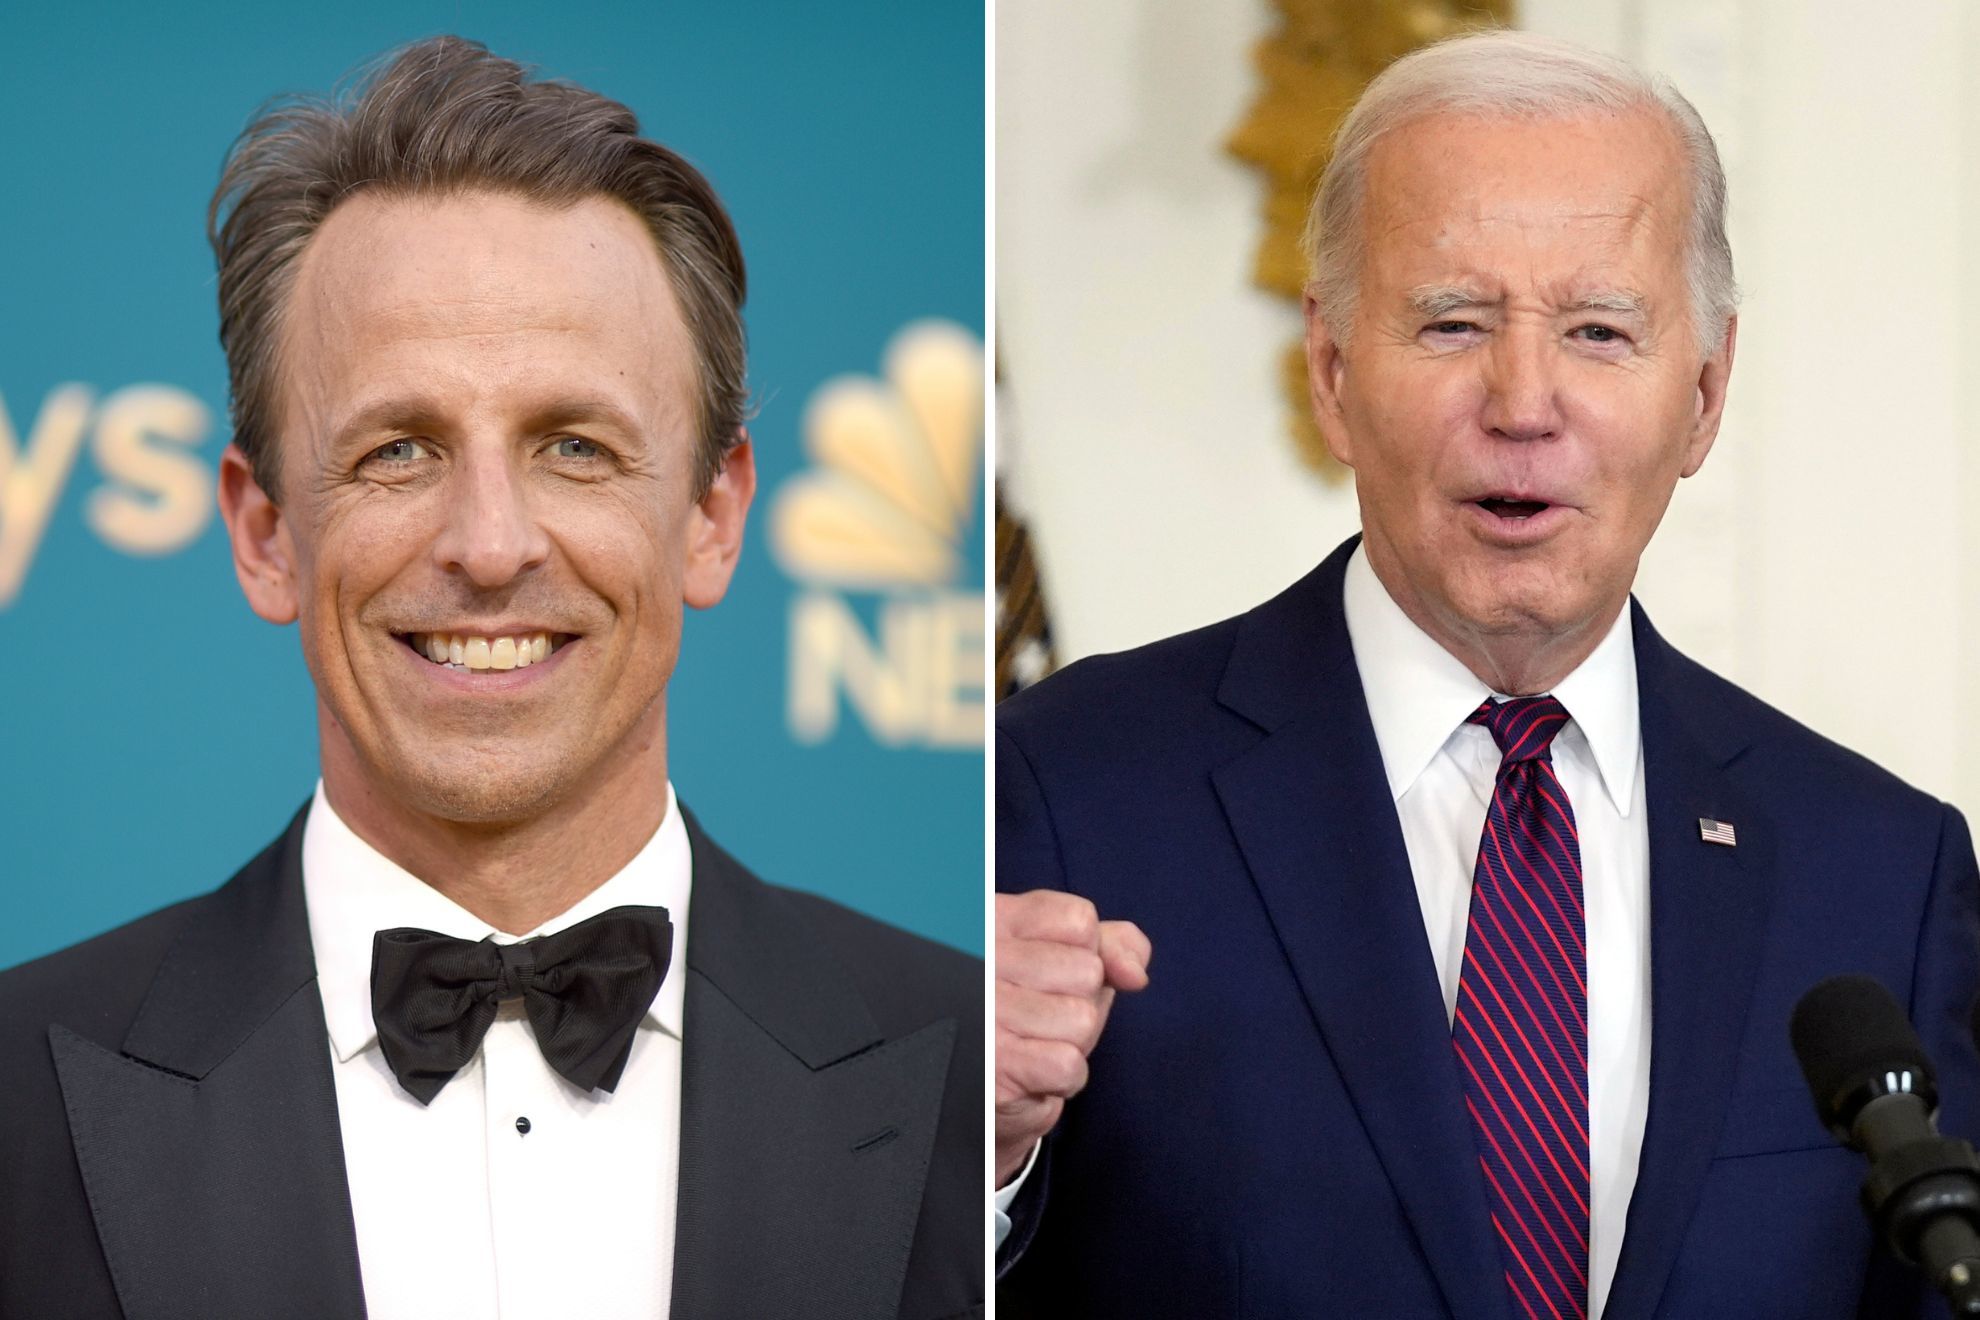 Joe Biden is set to give rare interview to late-night show host Seth Meyers